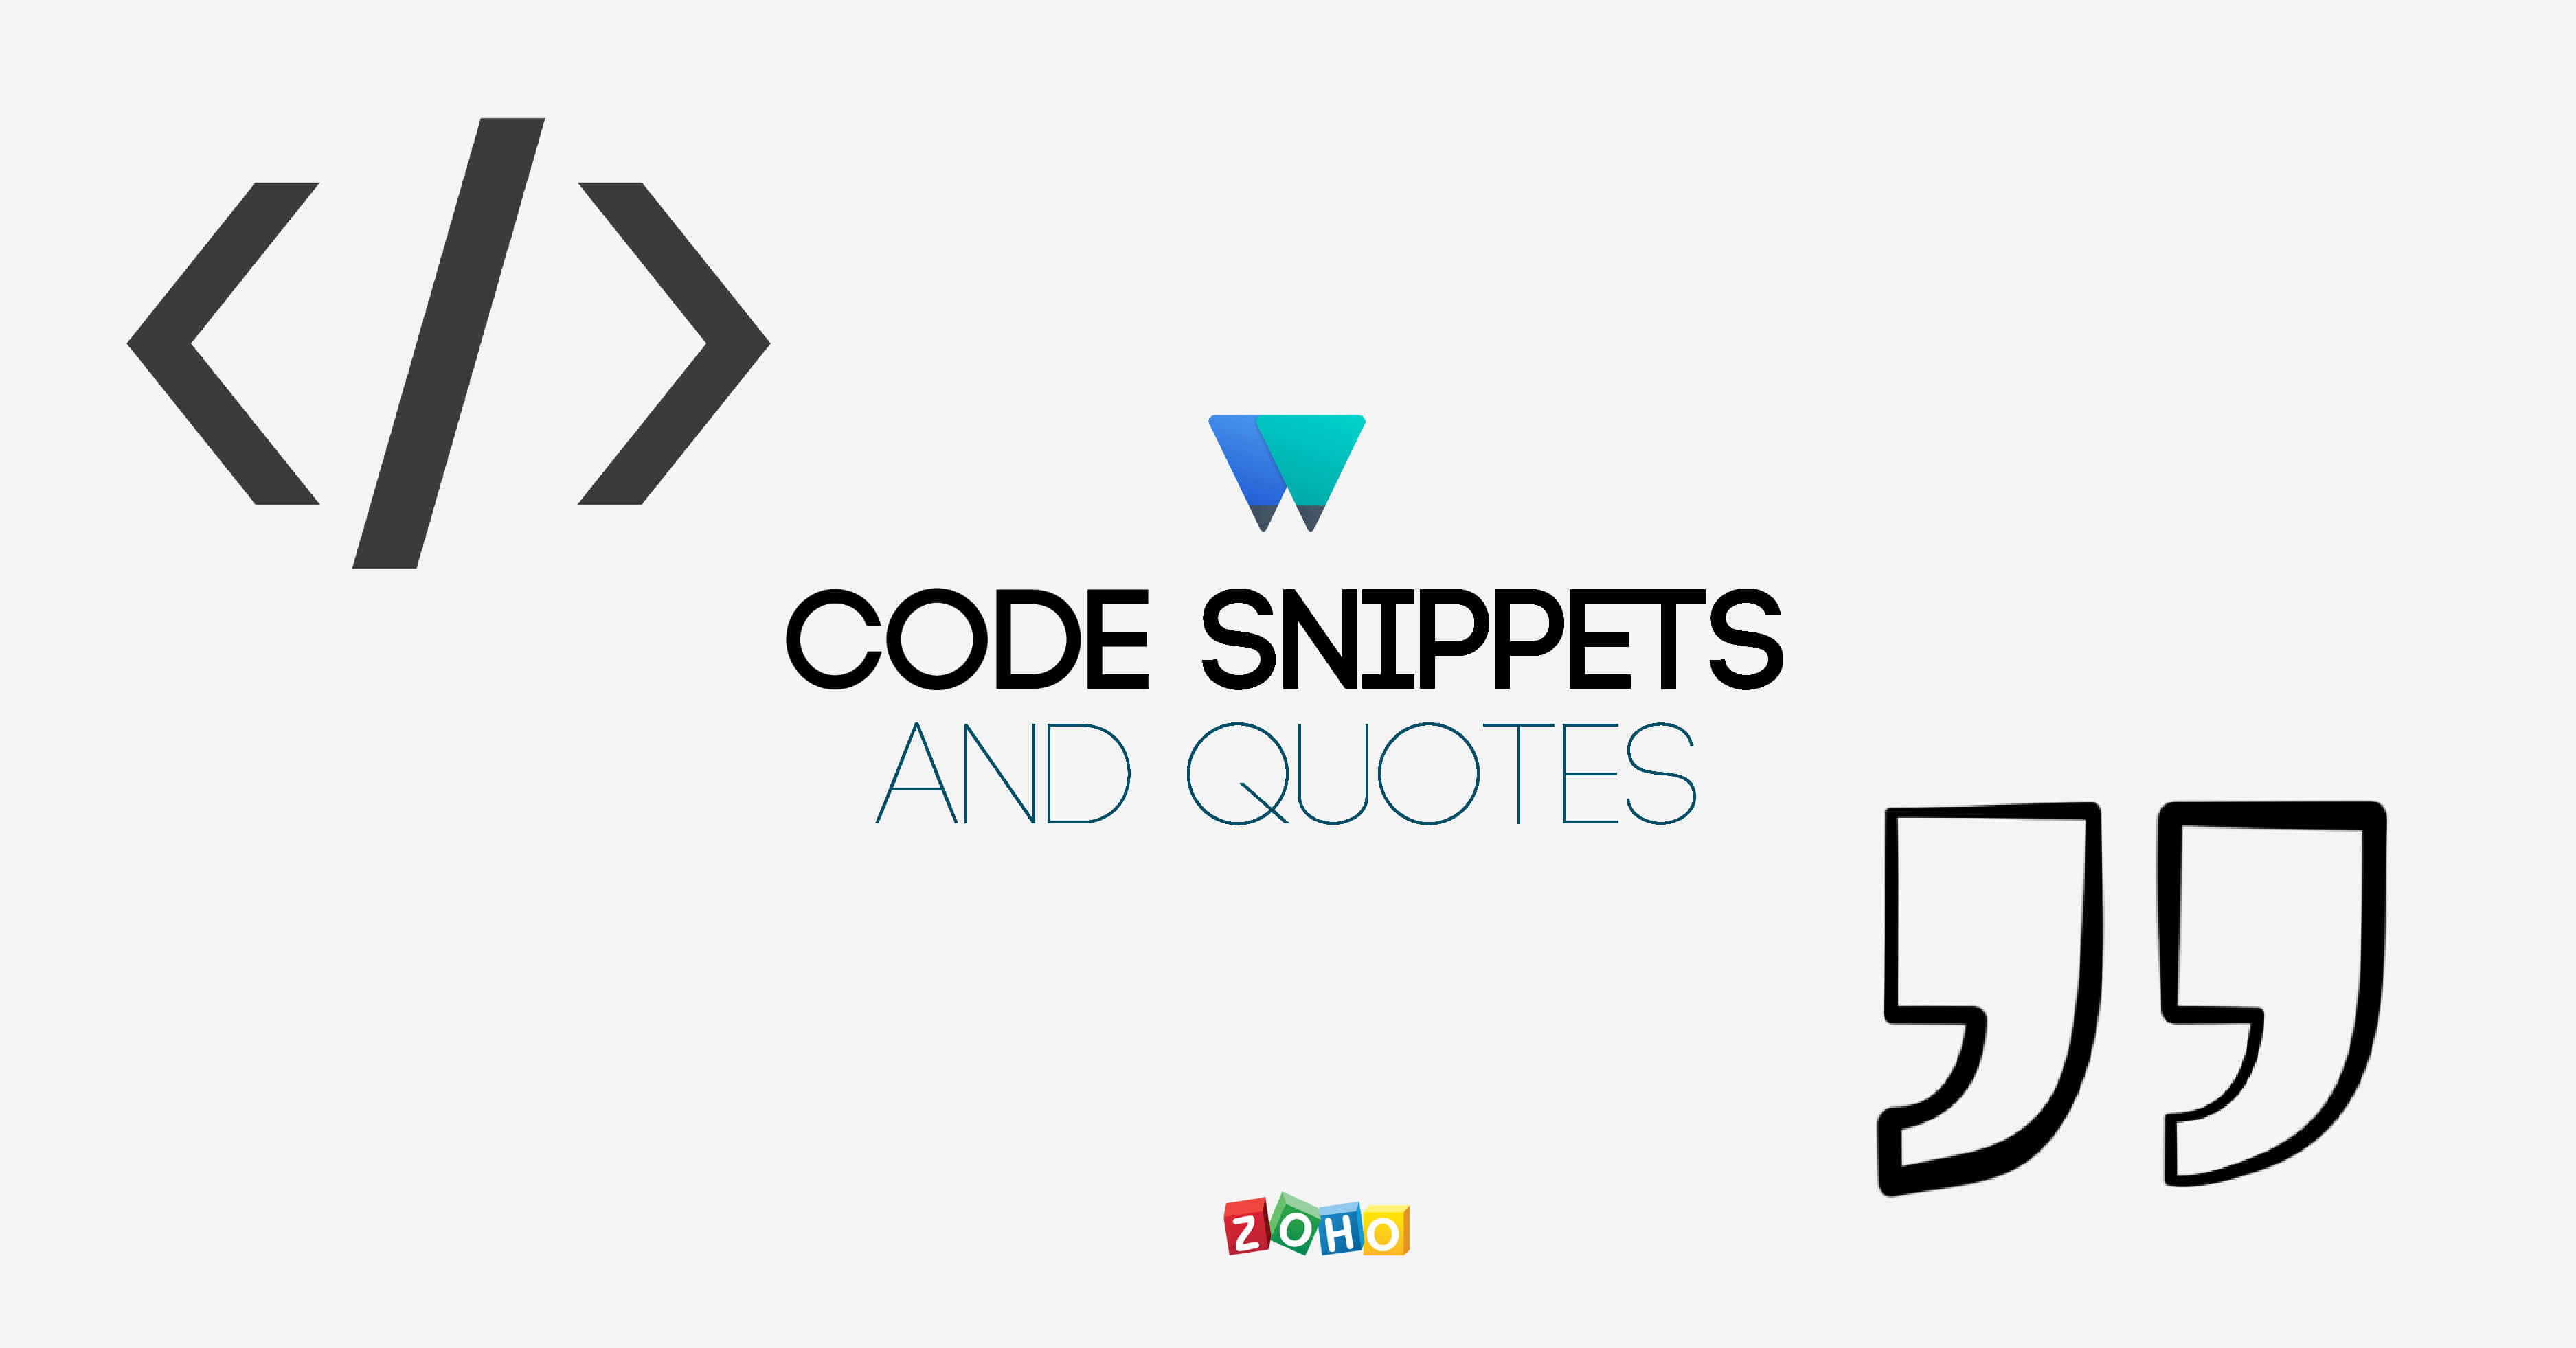 Introducing Collaborative Code Snippets, and Quotes in Writer  